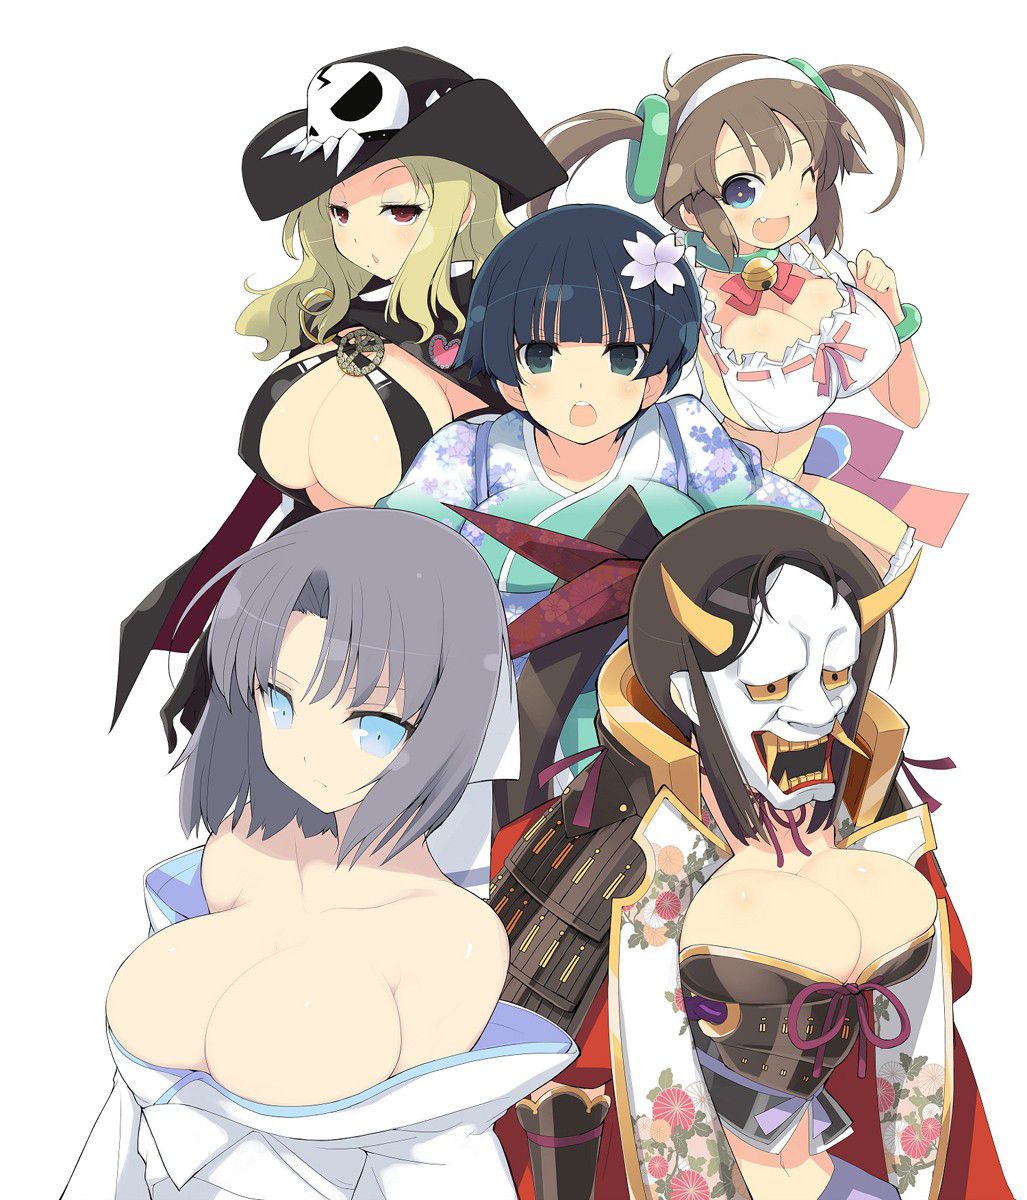 Thread to complete an image of 閃乱 カグラ which I collected so far 35